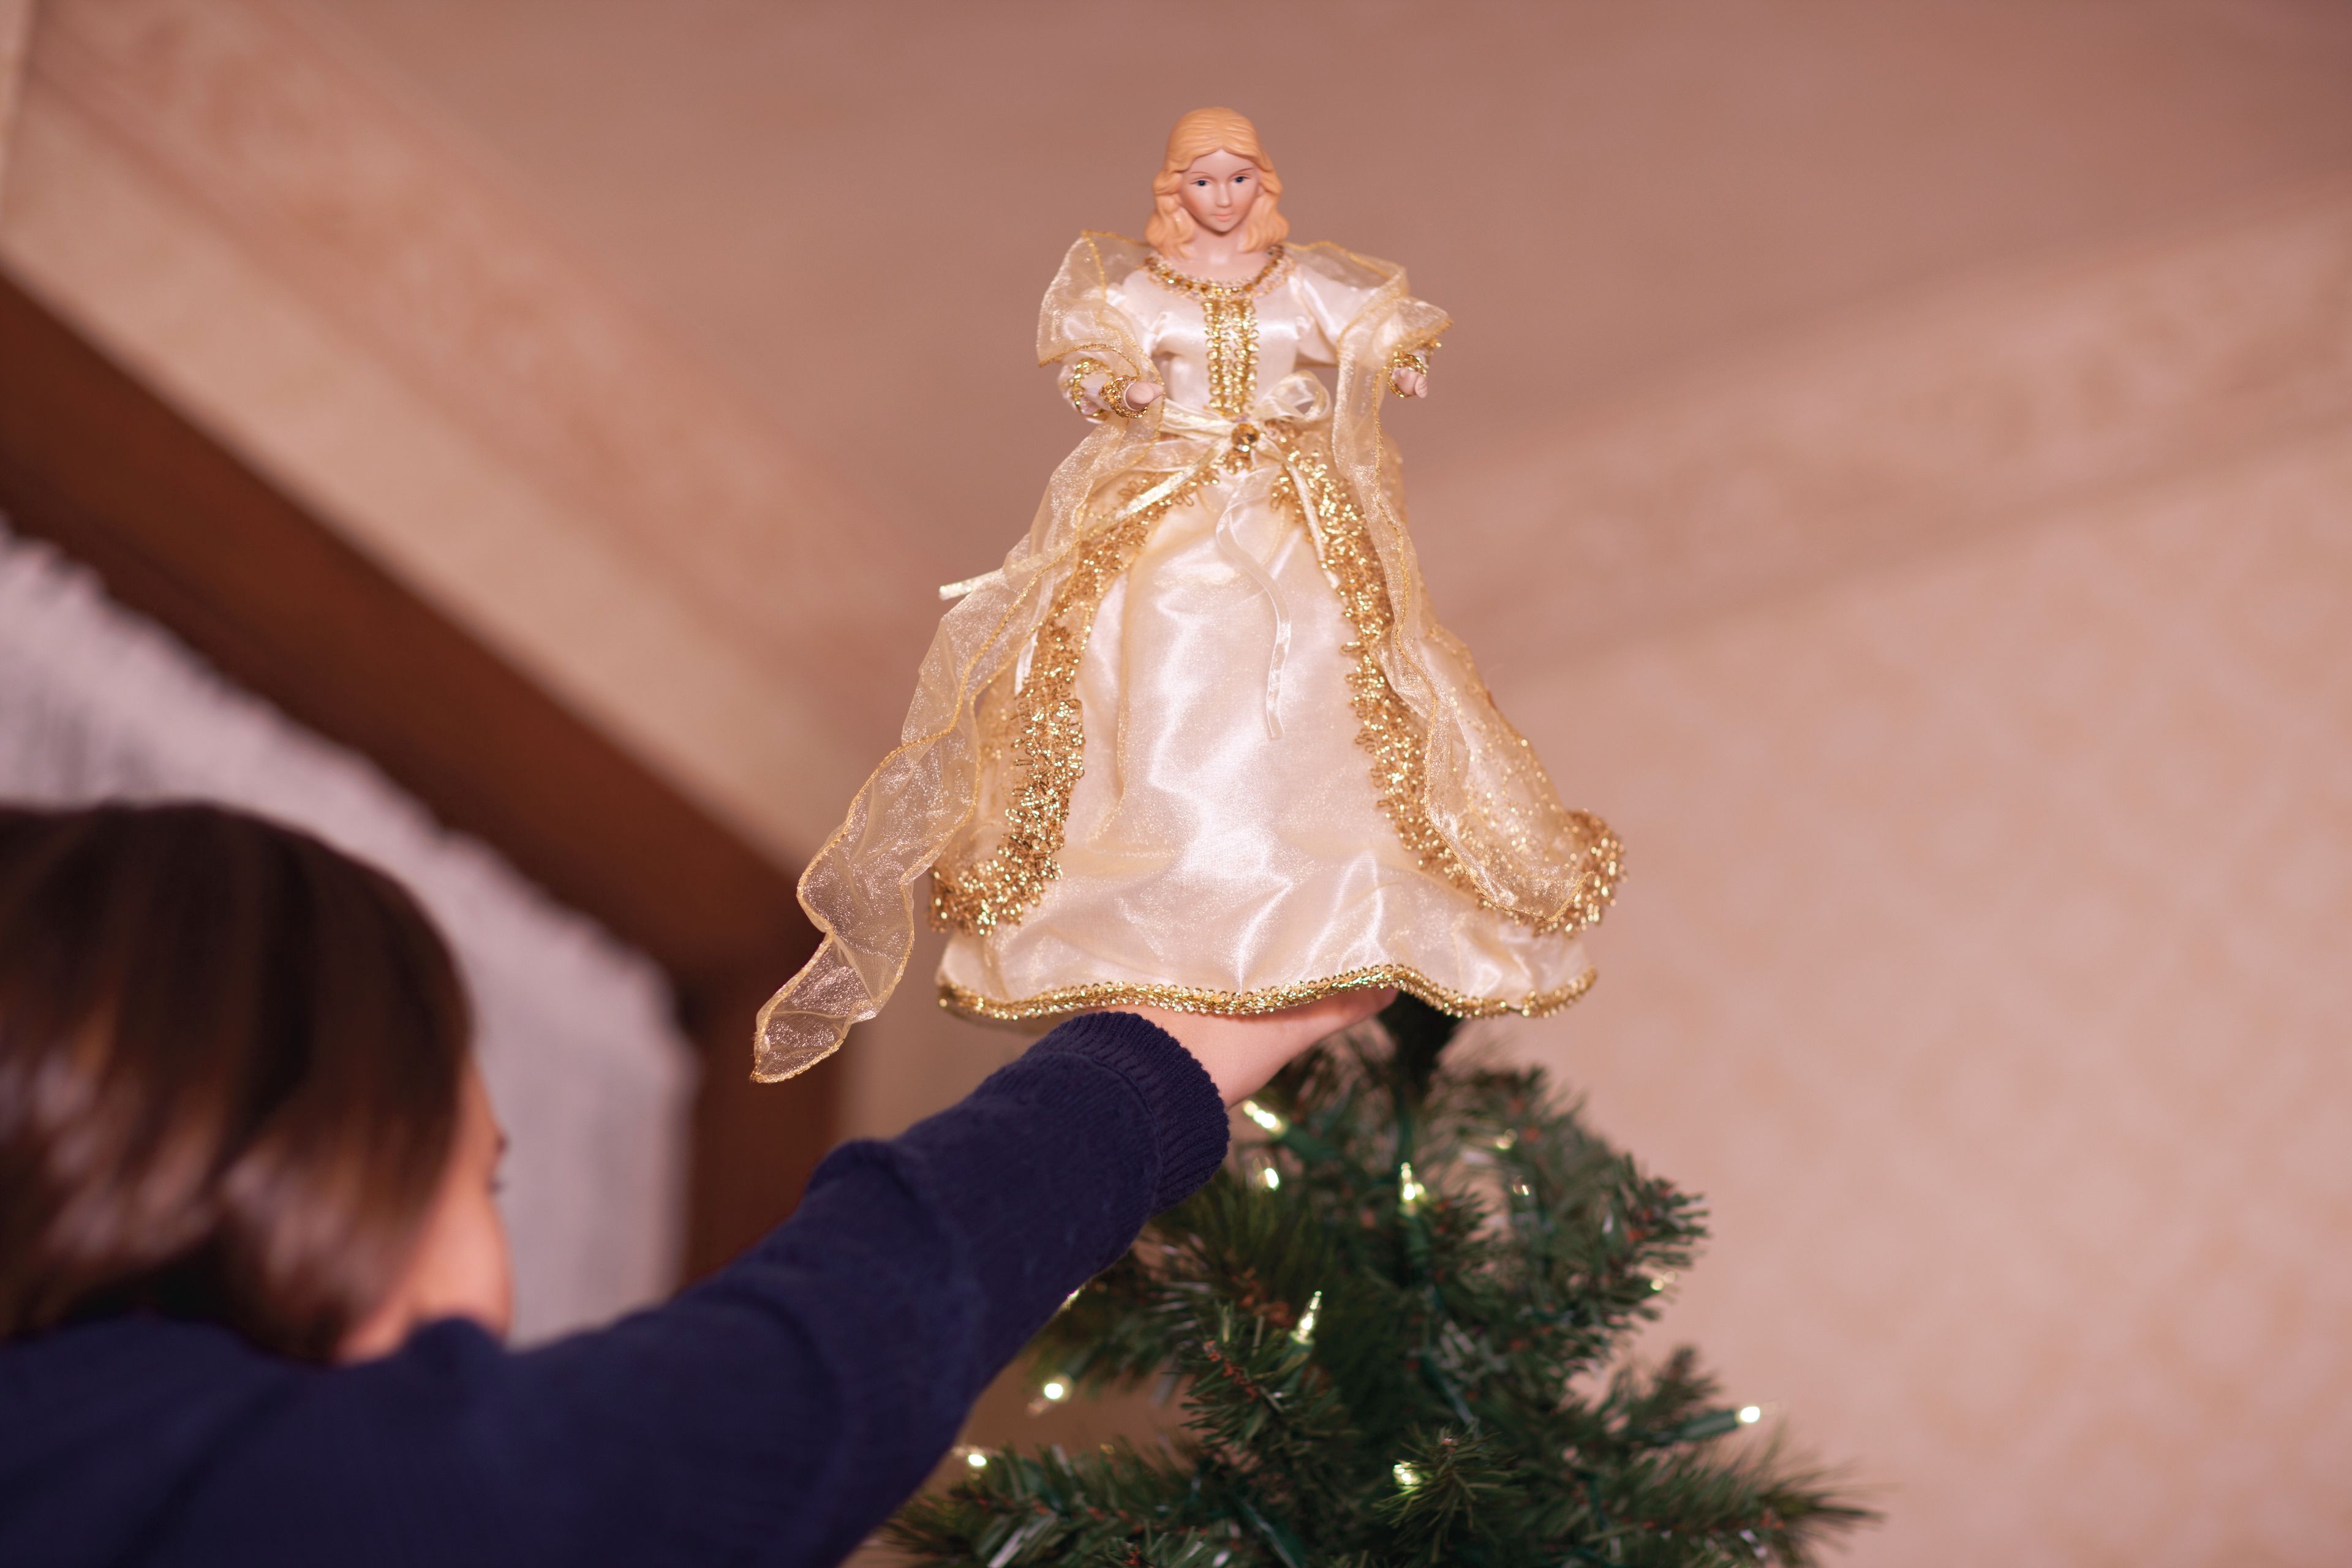 A young boy puts an angel on top of the Christmas tree.